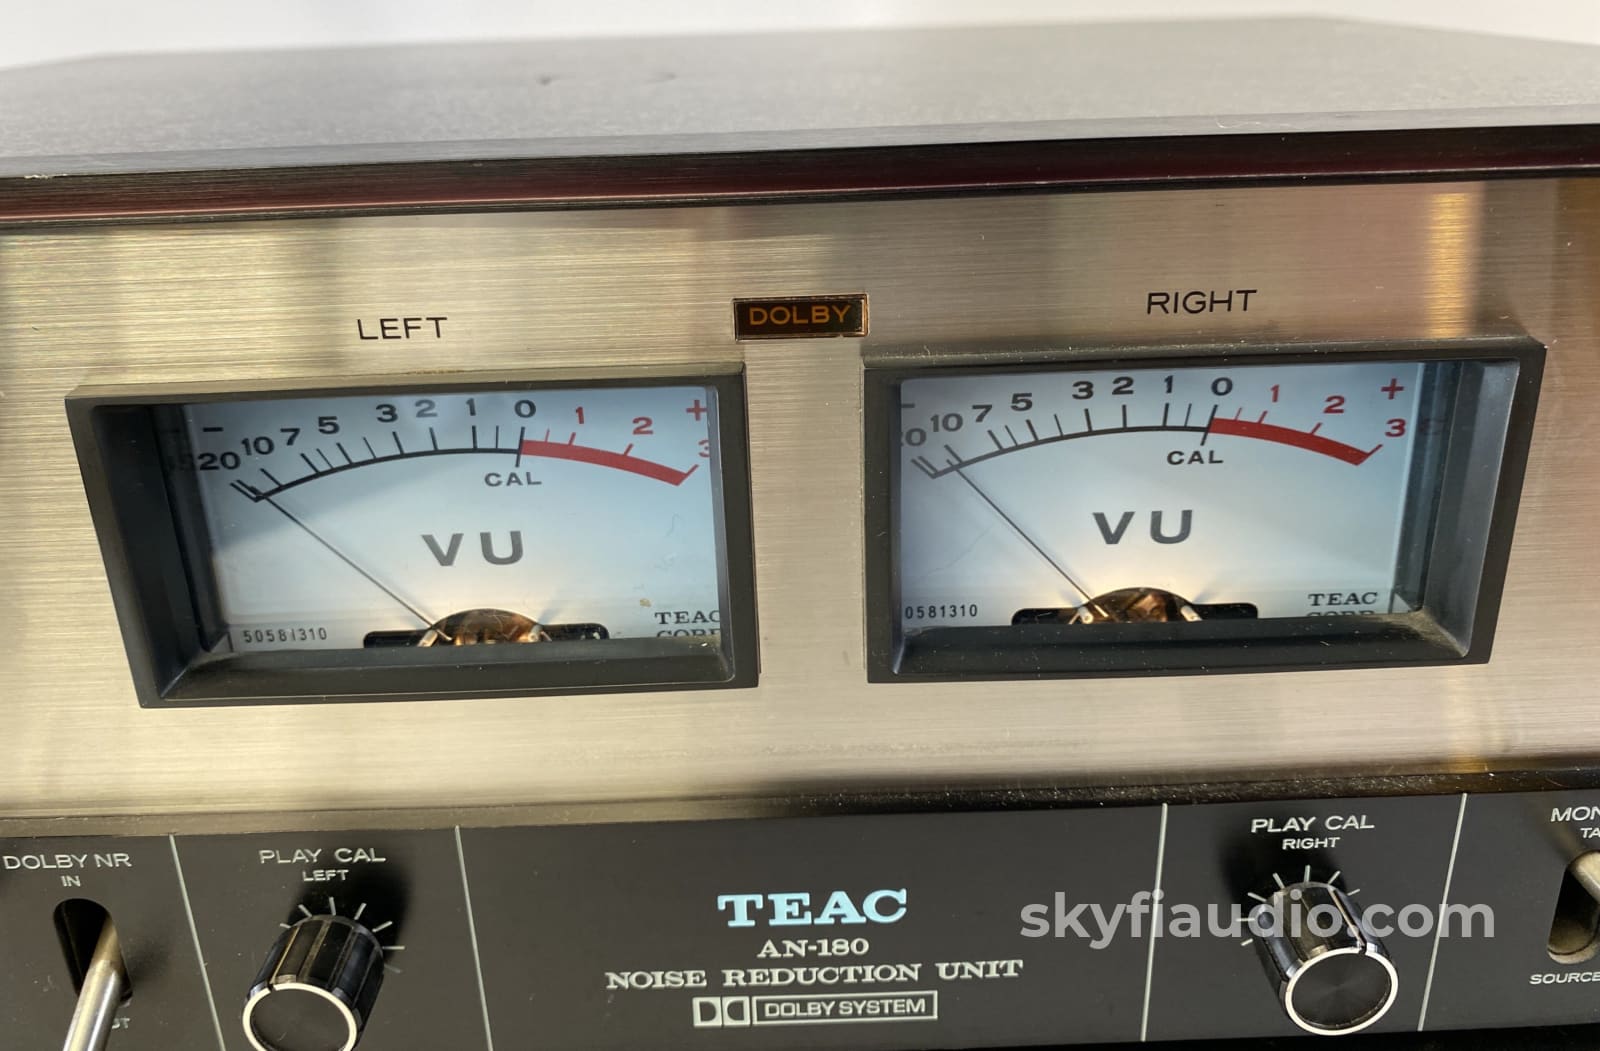 Teac An-180 Dolby Noise Reduction Unit - Tested And Working Accessory